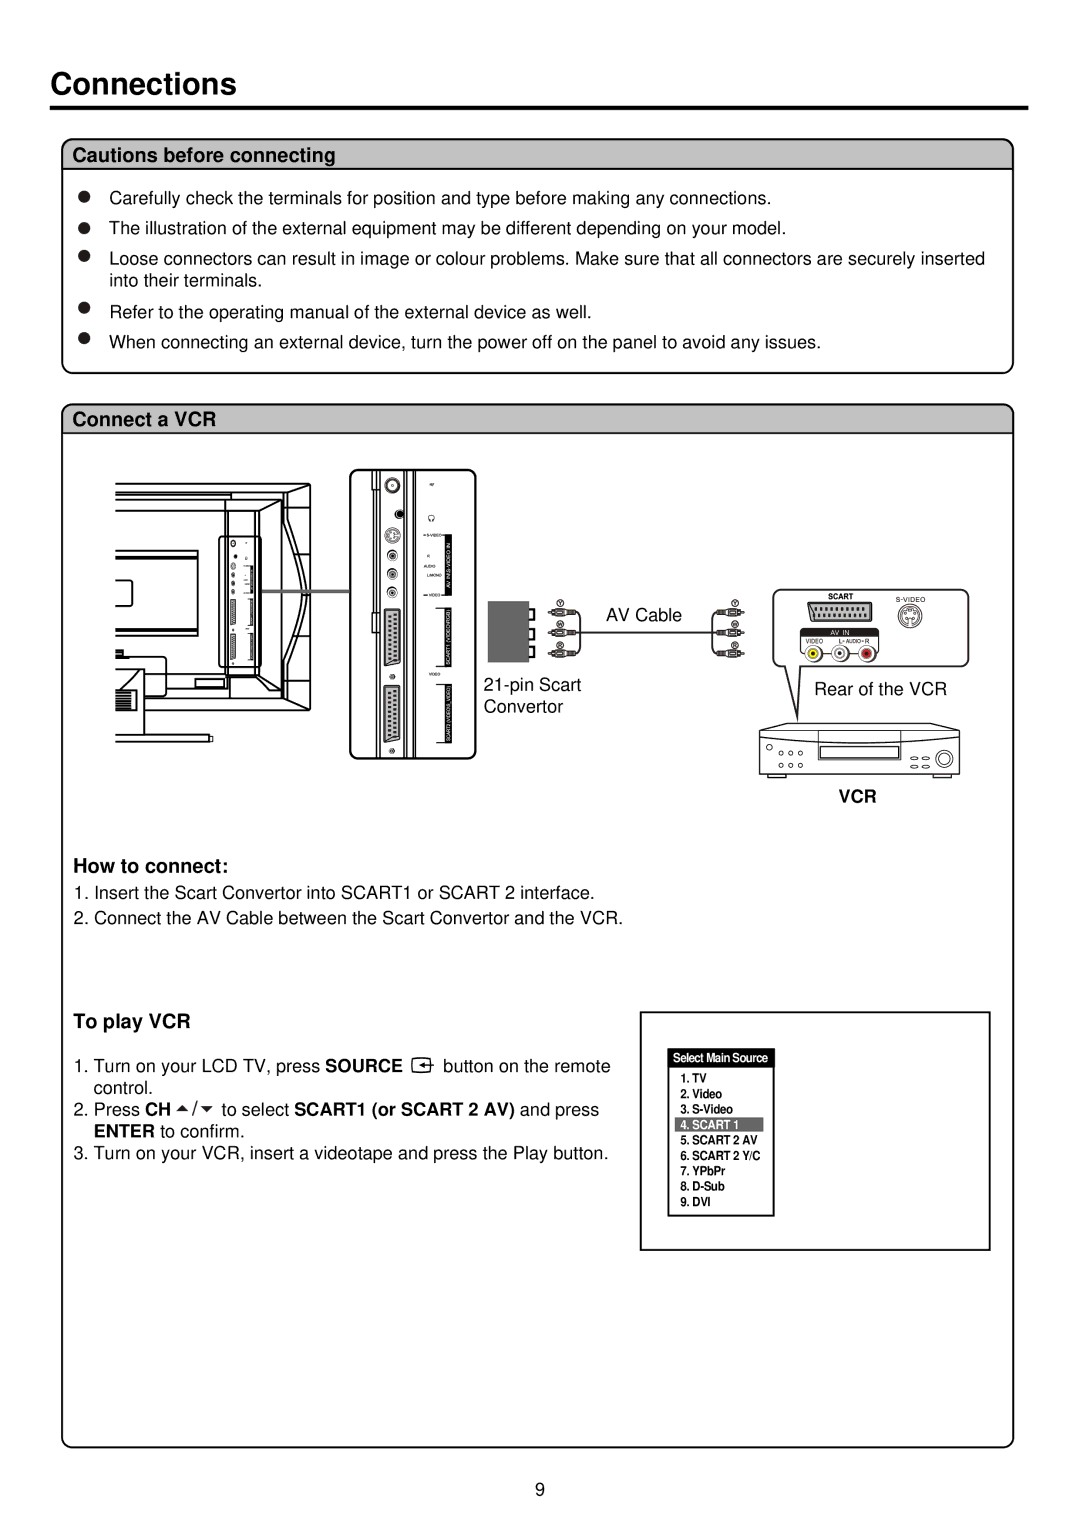 Palsonic TFTV680 owner manual Connections, Connect a VCR, How to connect, To play VCR 